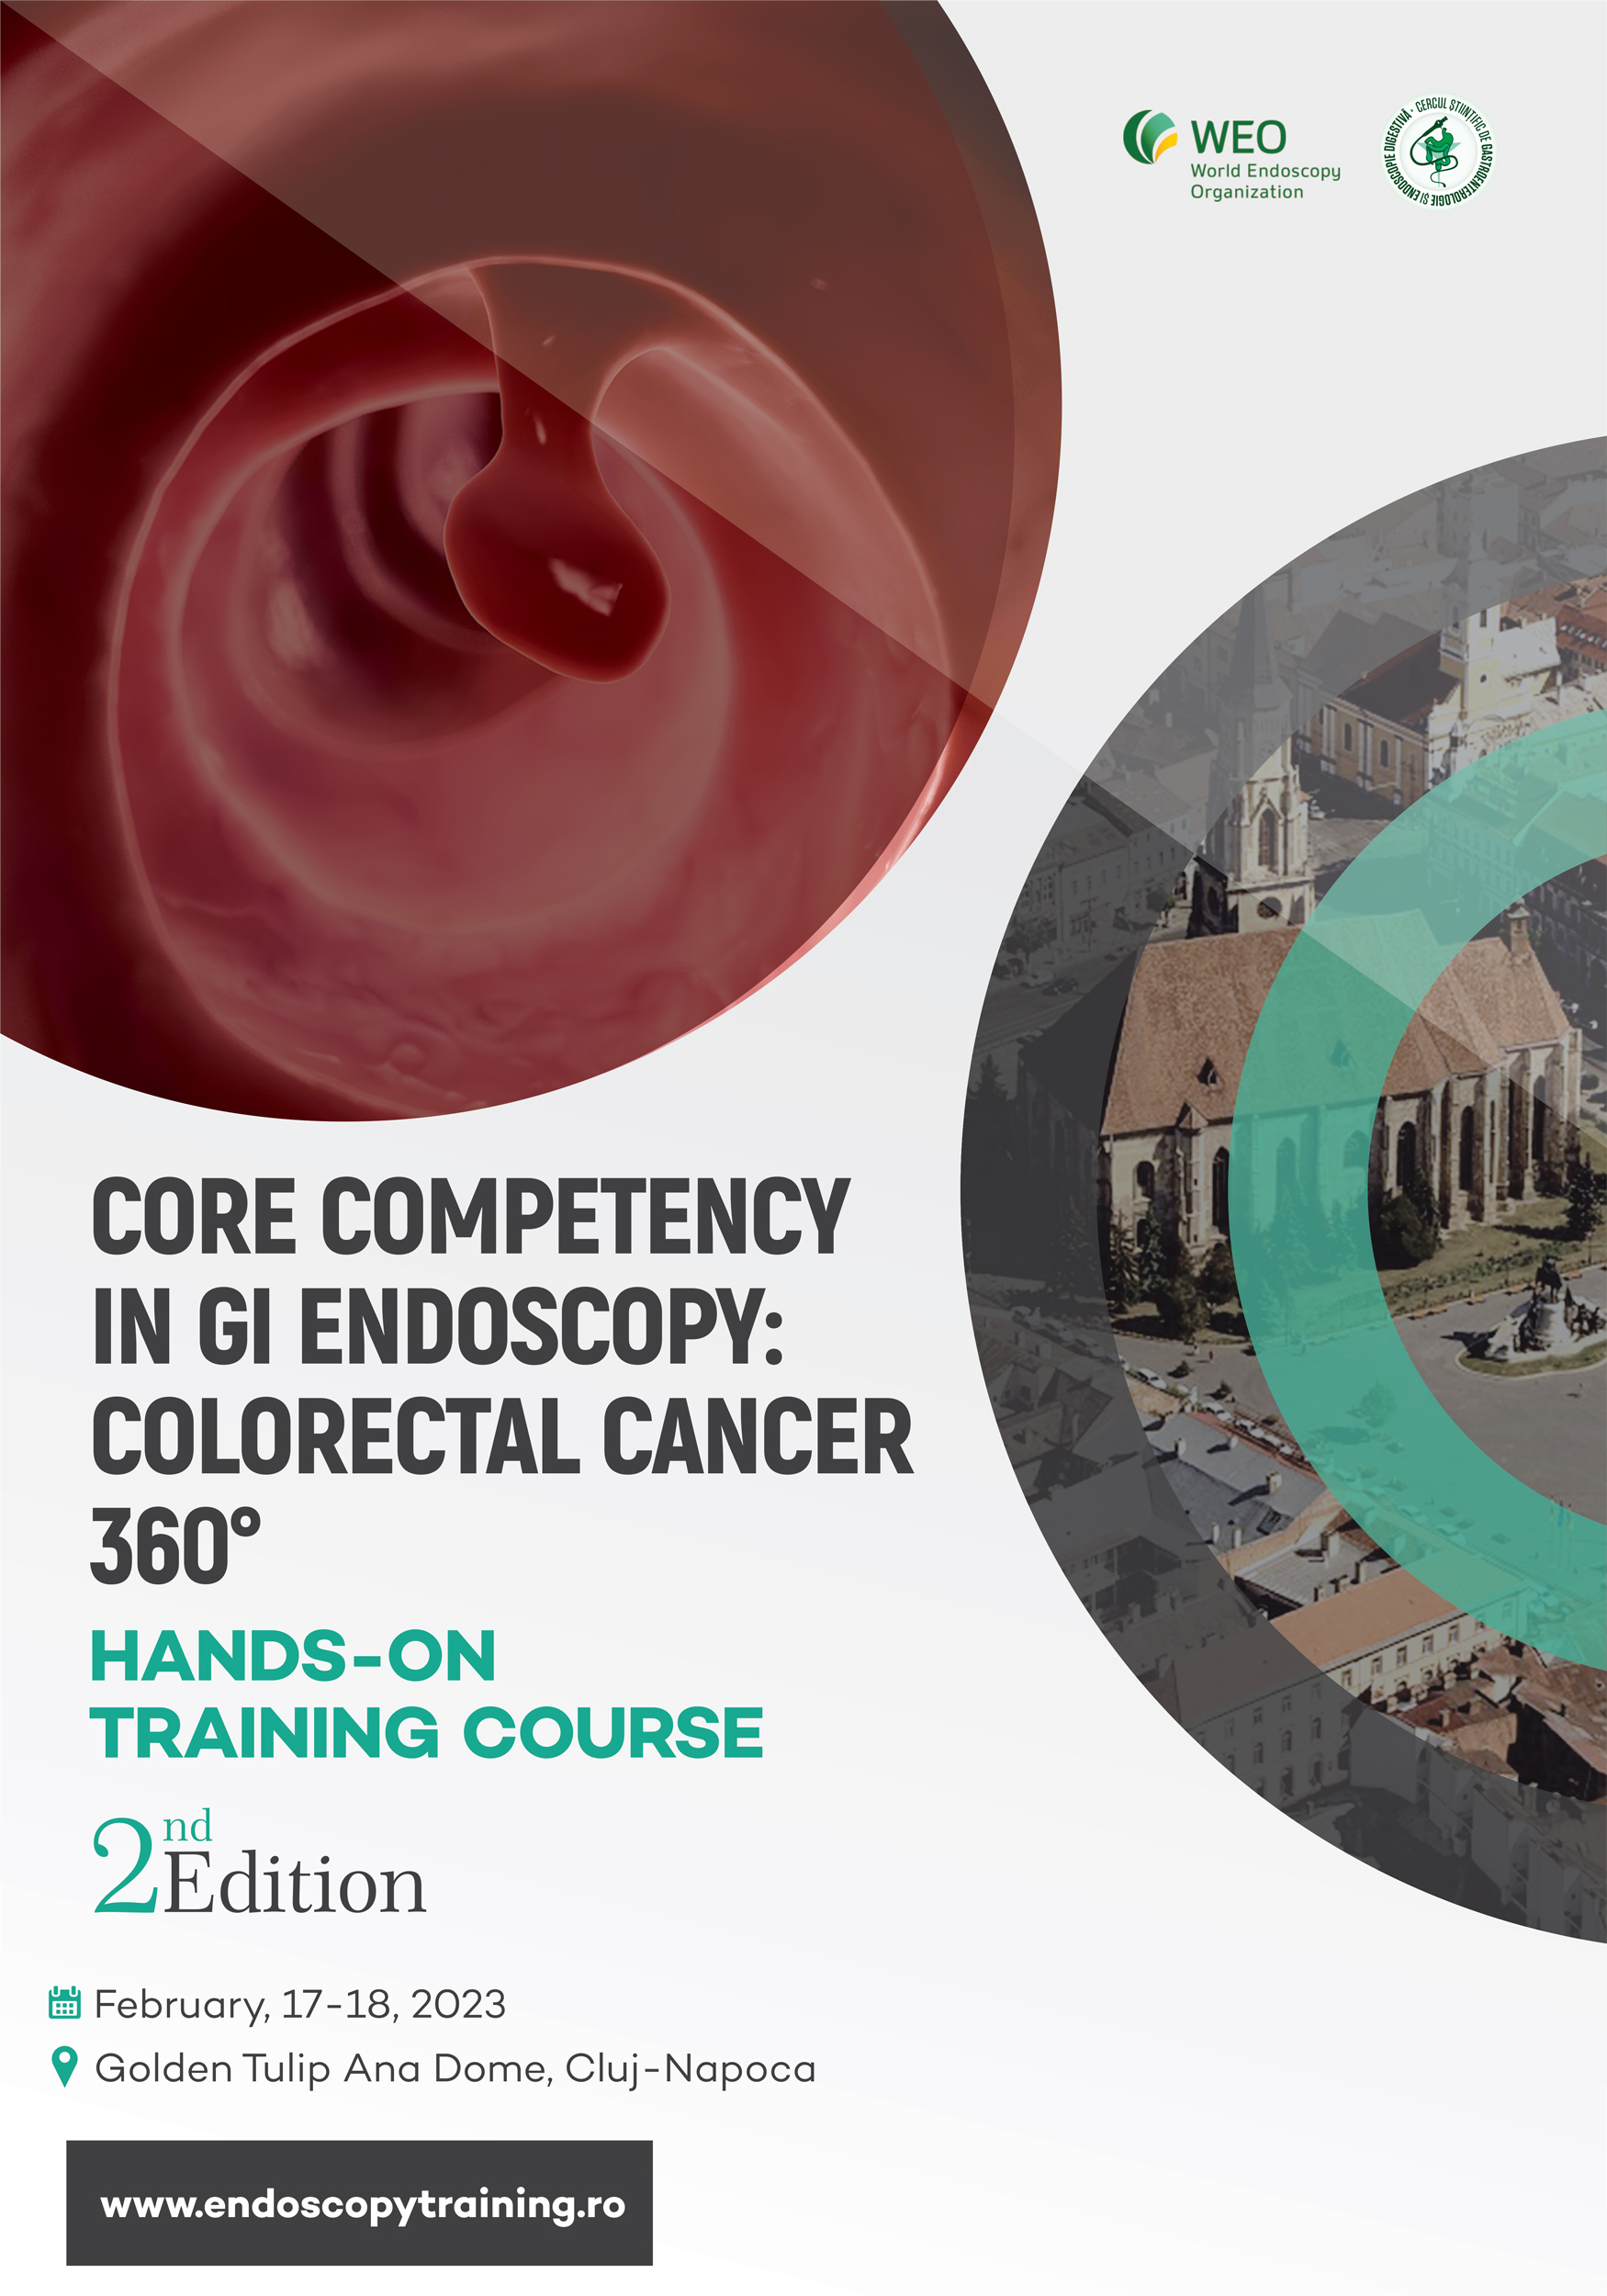 Core Competency in GI endoscopy: Hands-on training course